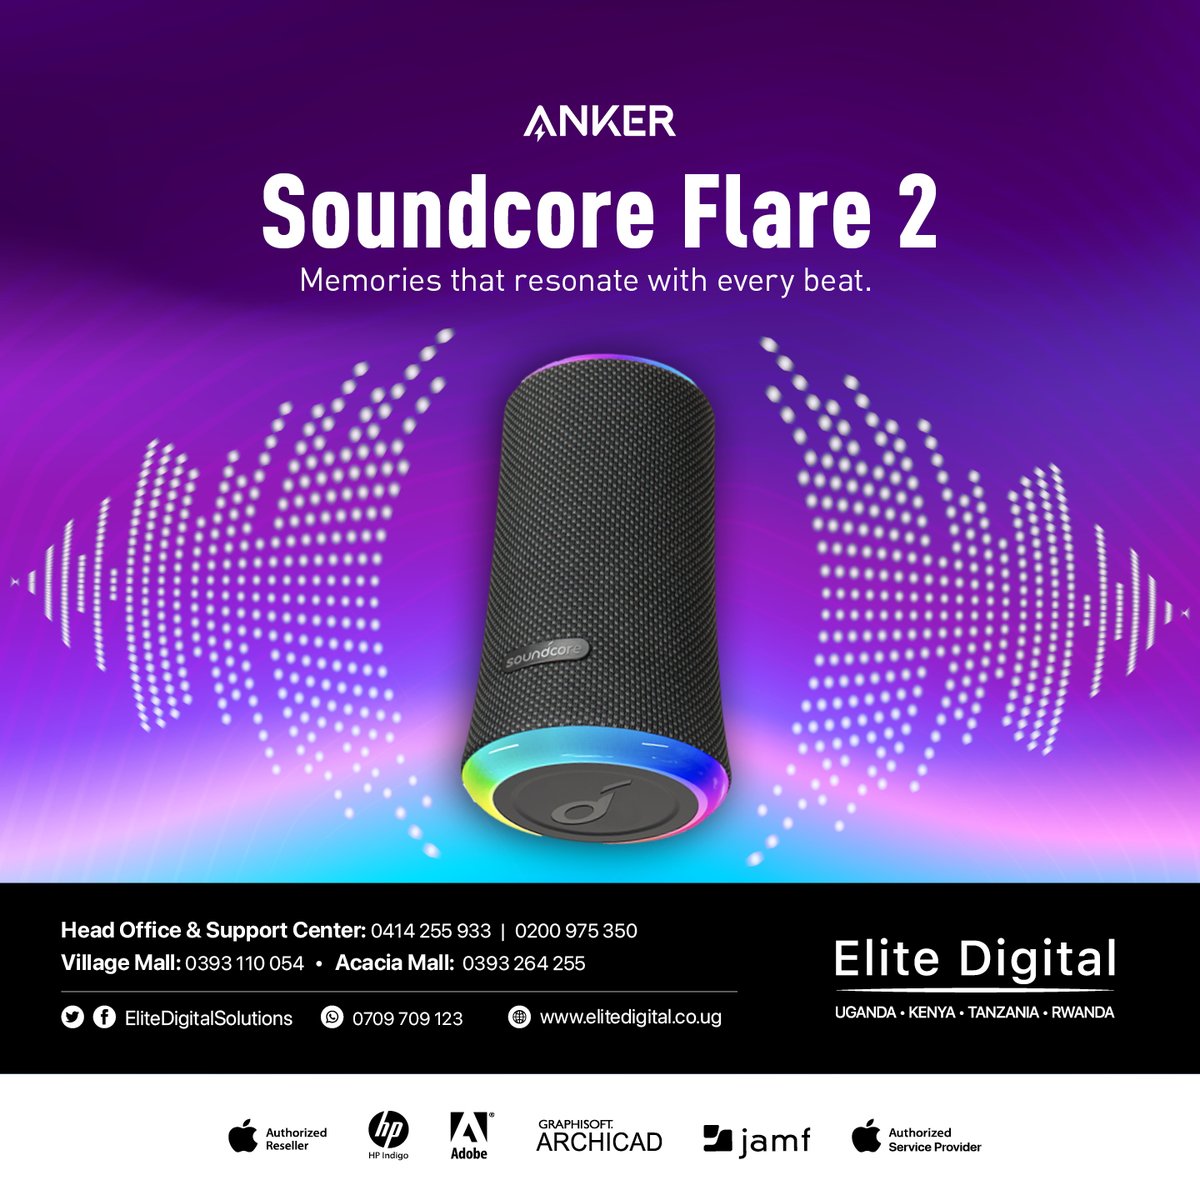 Get ready to amplify your music experience with the Anker Sound Core Flare 2 Bluetooth speaker.

Feel the rhythm & hear the depth of every beat. Reach out now and get one today.
#BuyEliteBuyGenuine #UpgradeYourSound